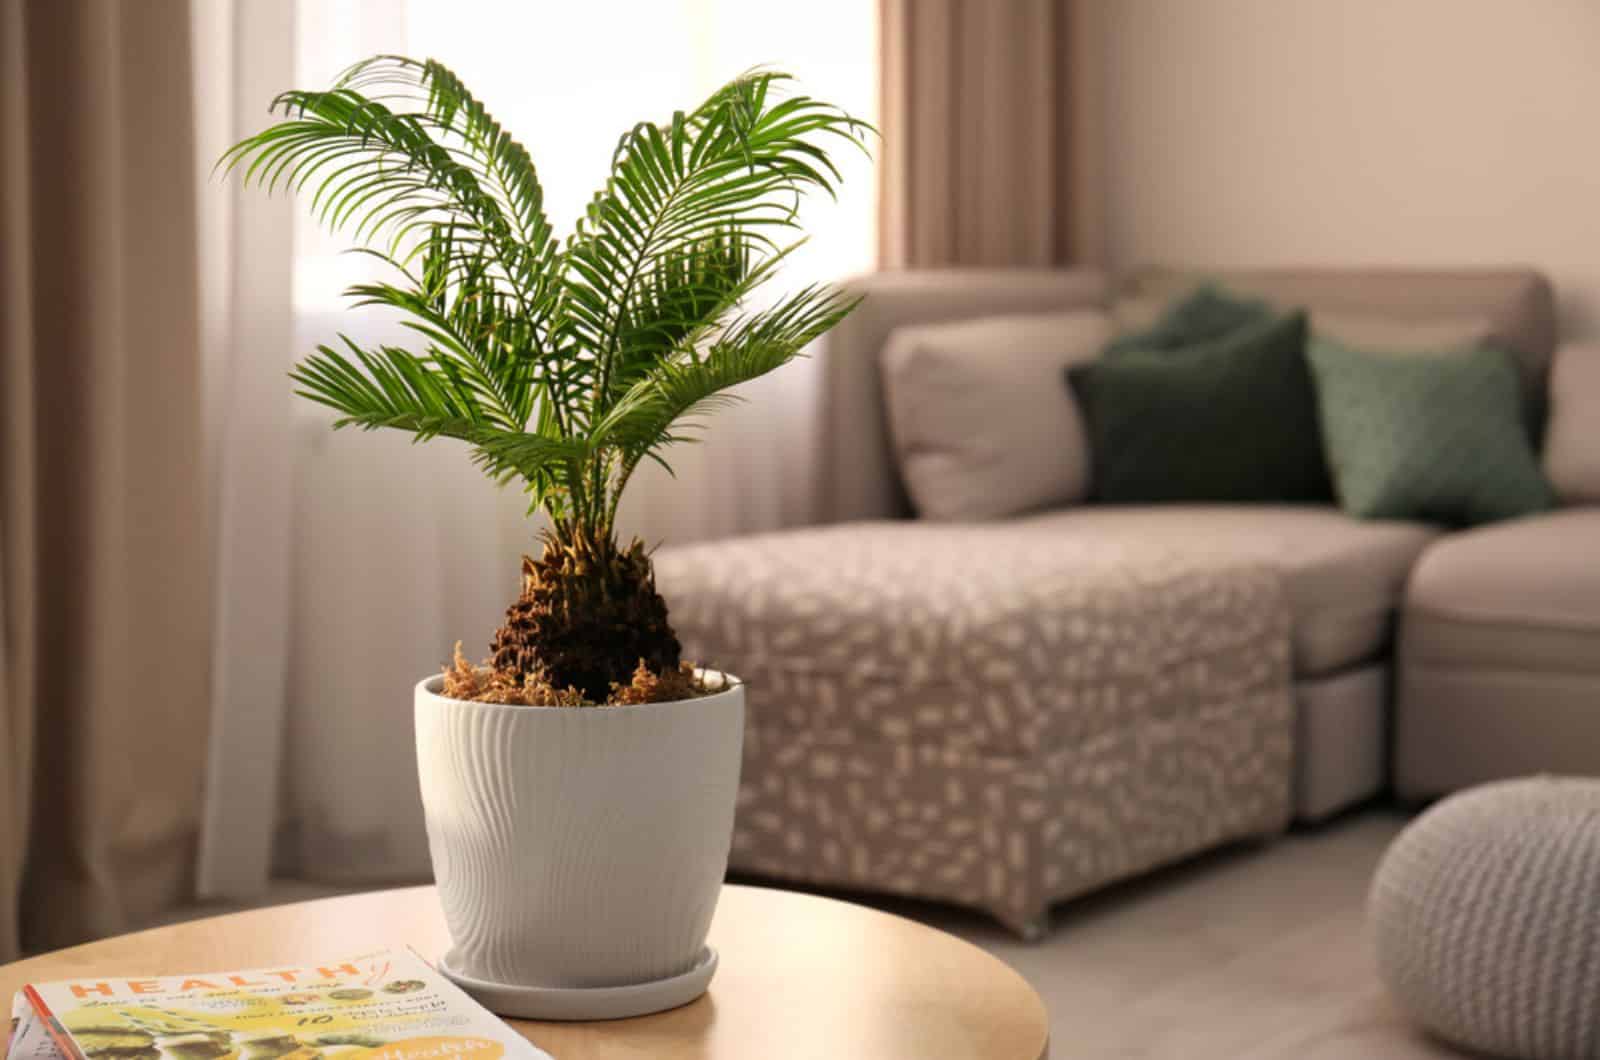 sago palm on table in apartment